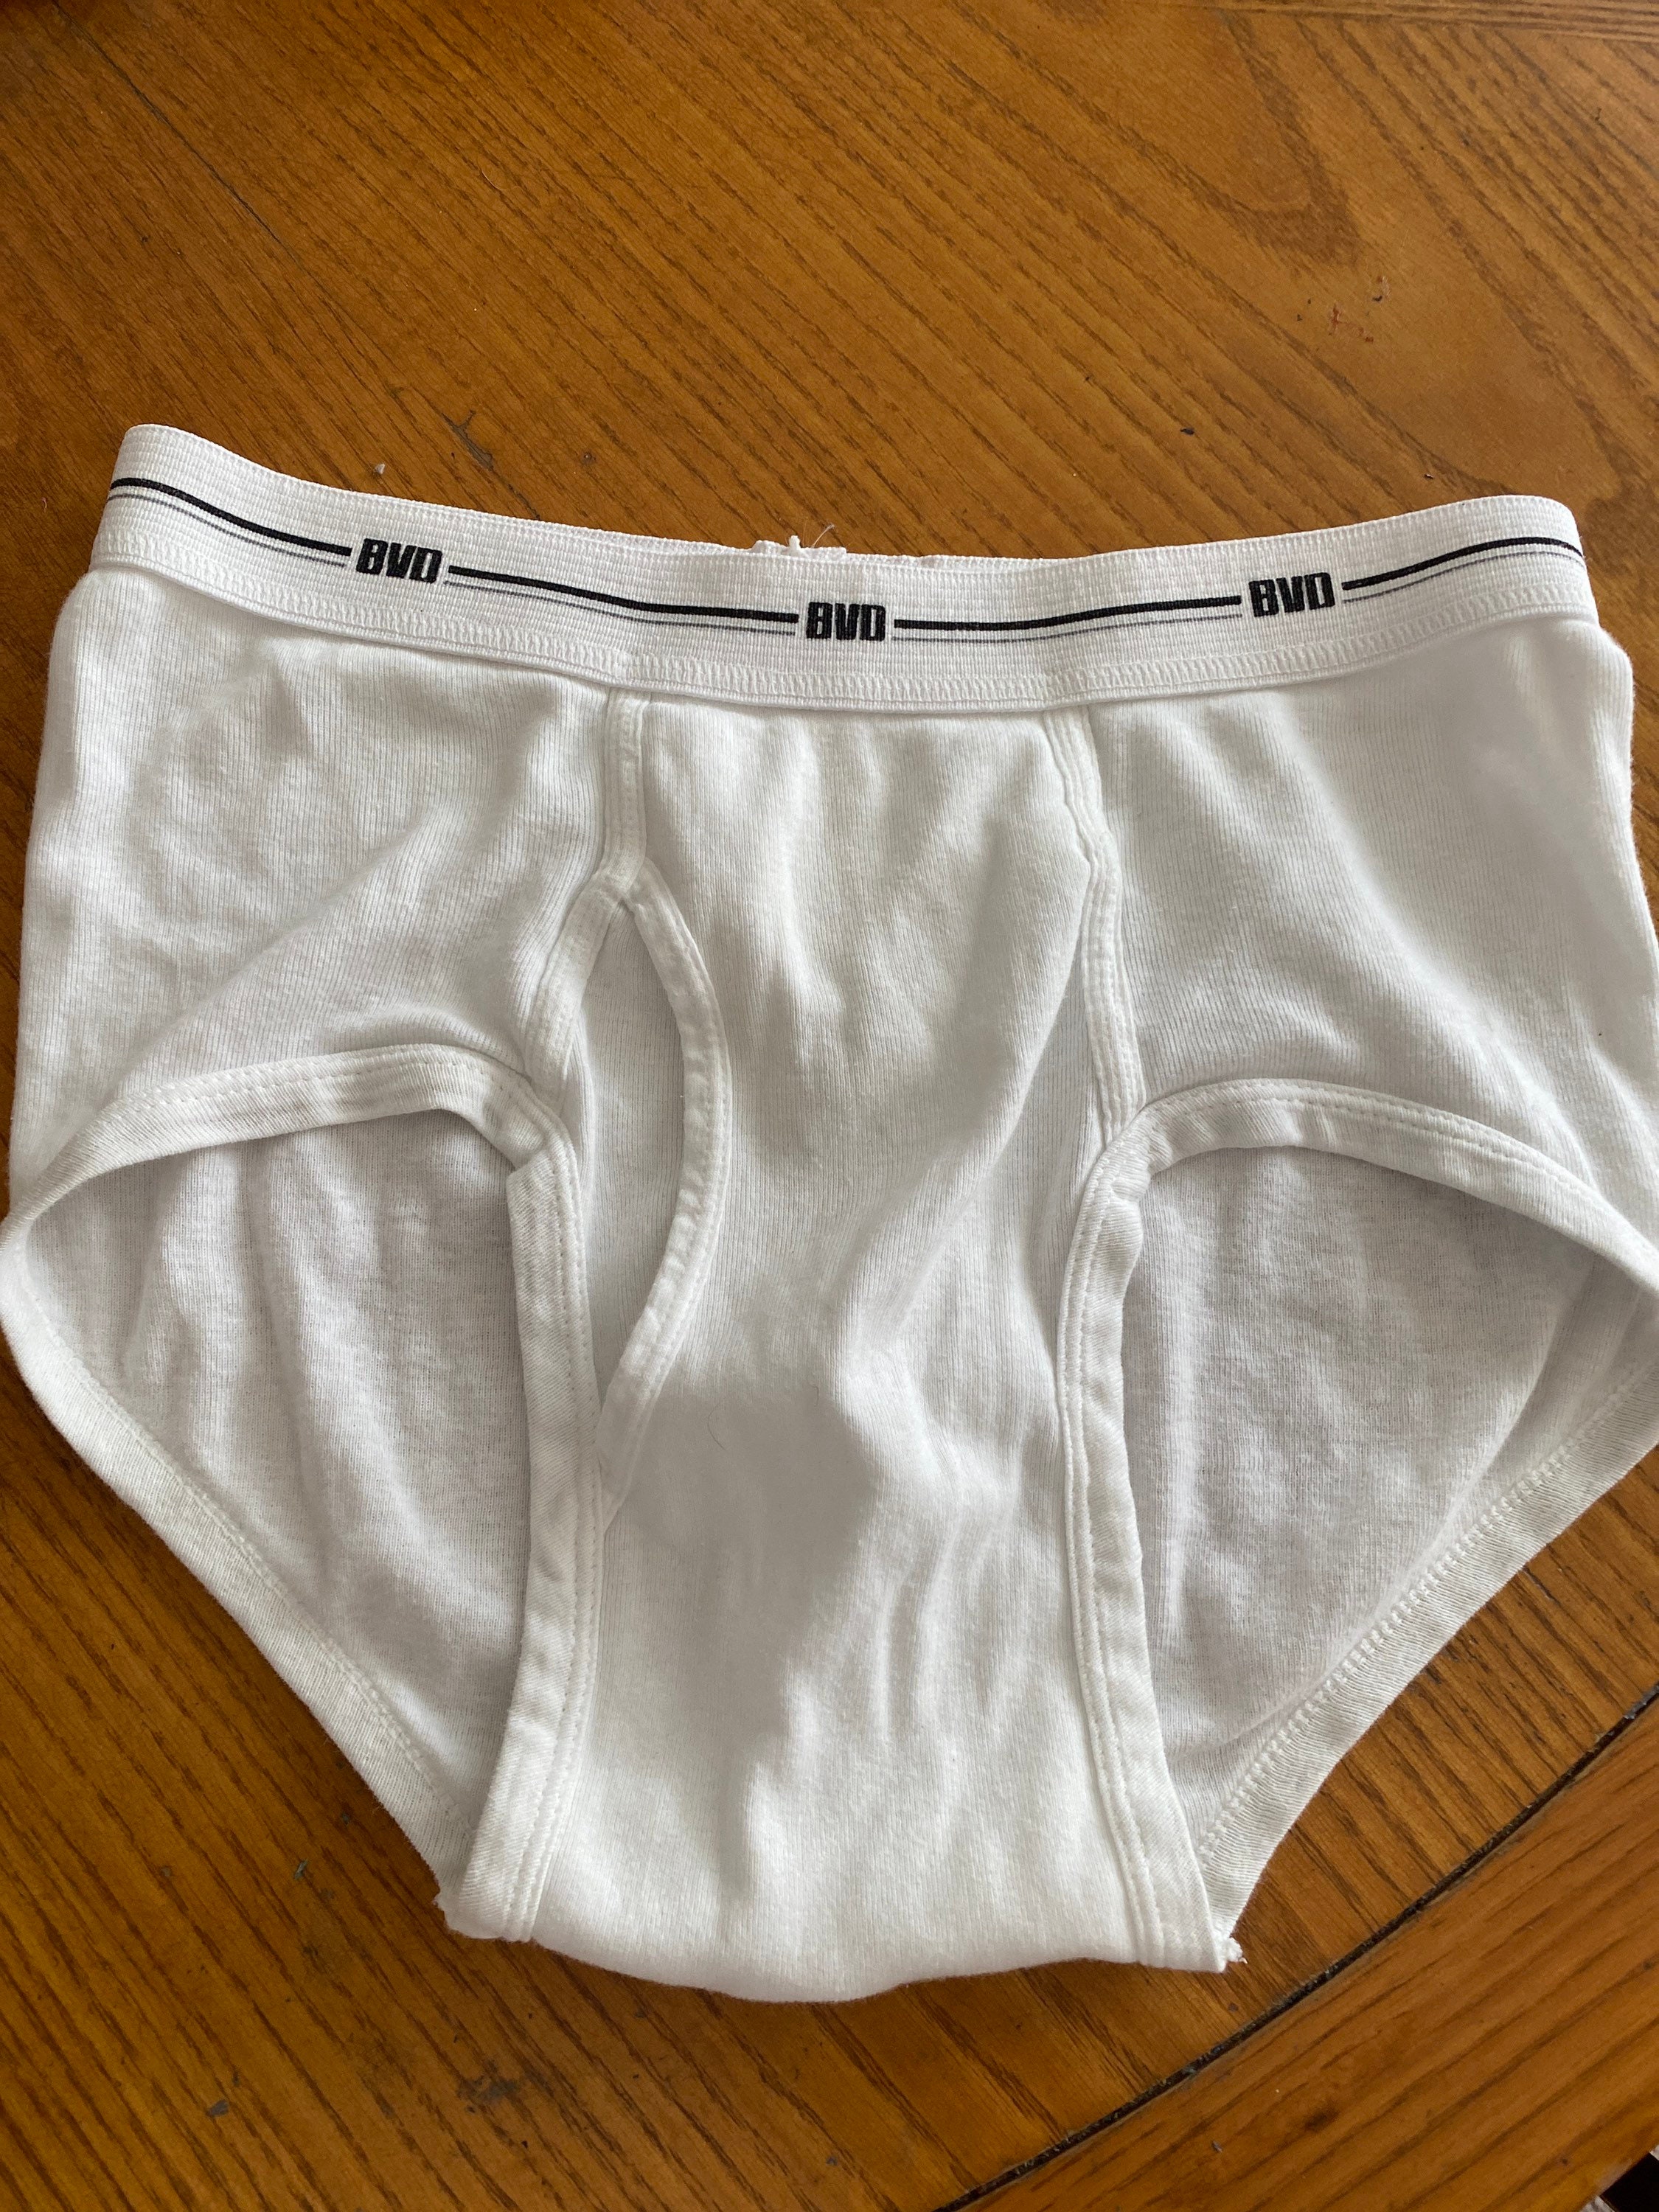 Bvd Underwear for sale | Only 2 left at -65%